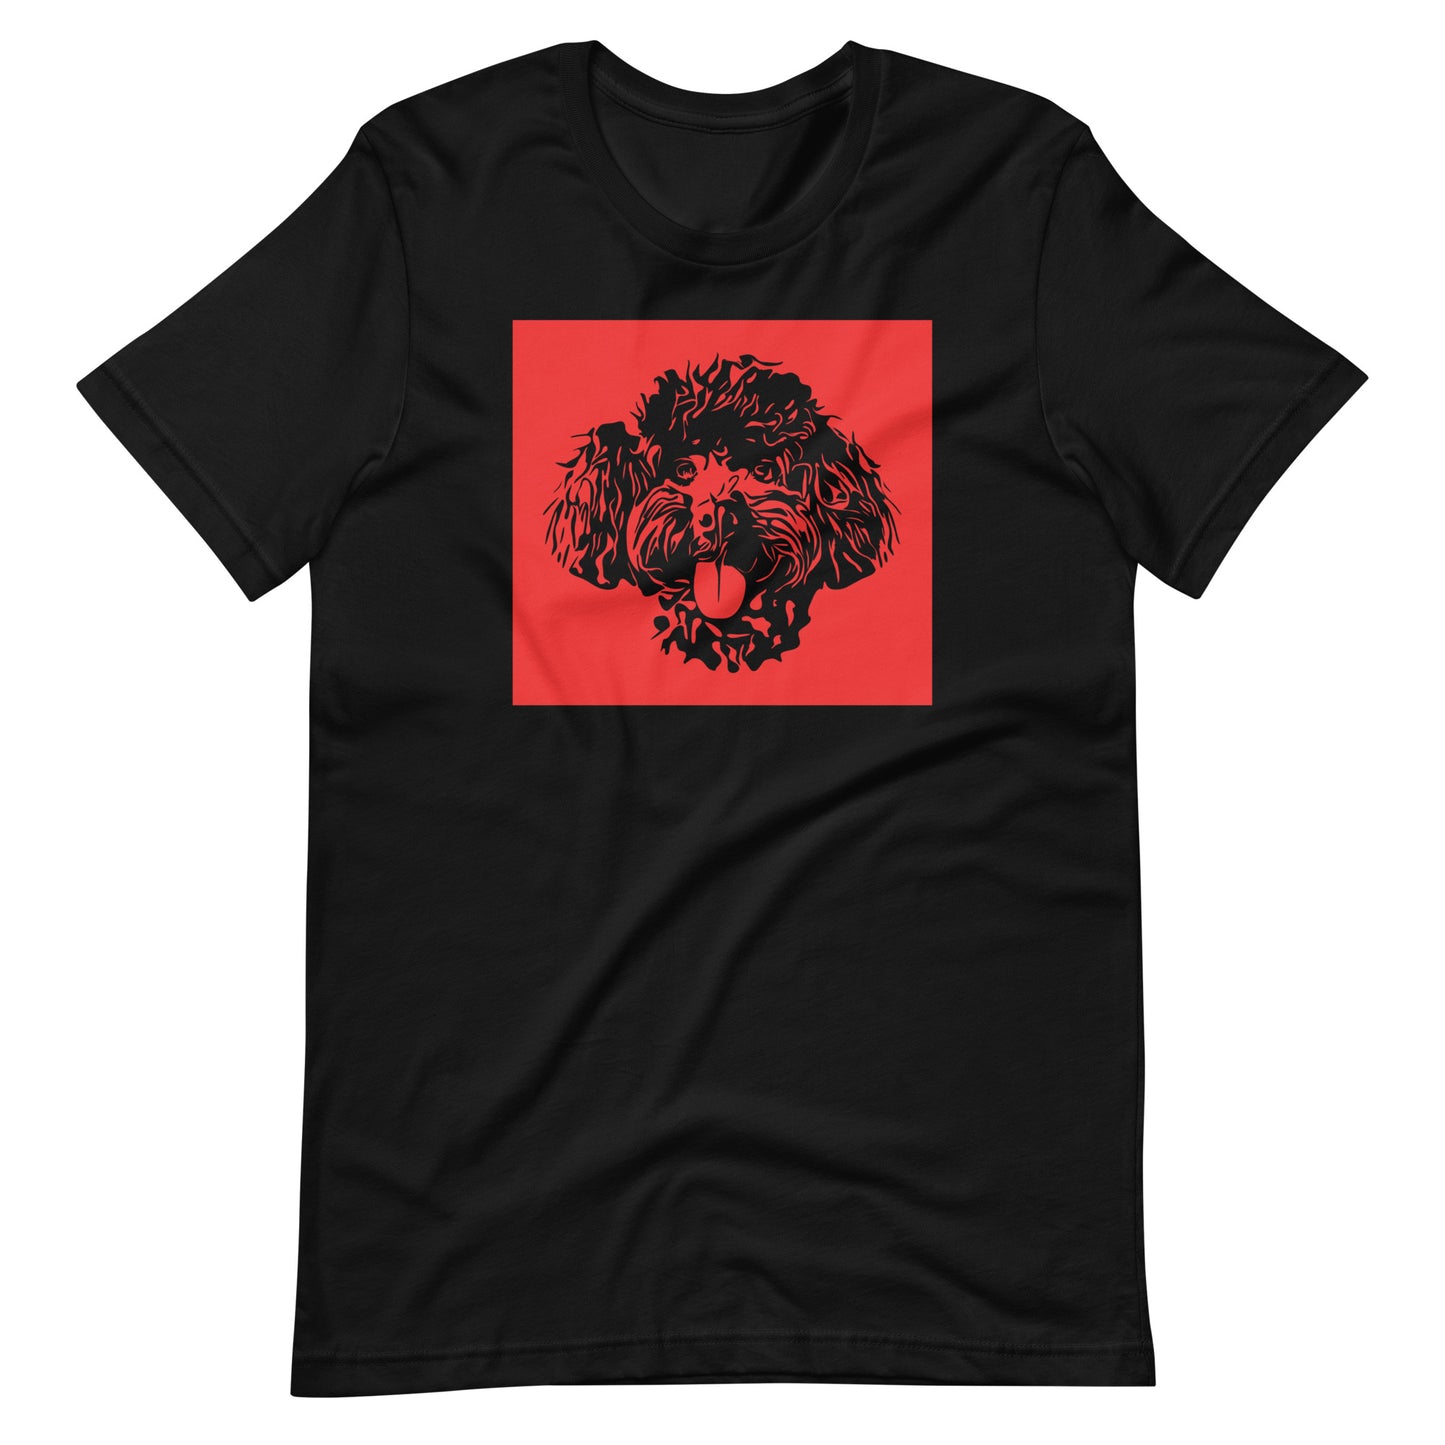 Toy Poodle face silhouette with red background square on unisex black t-shirt